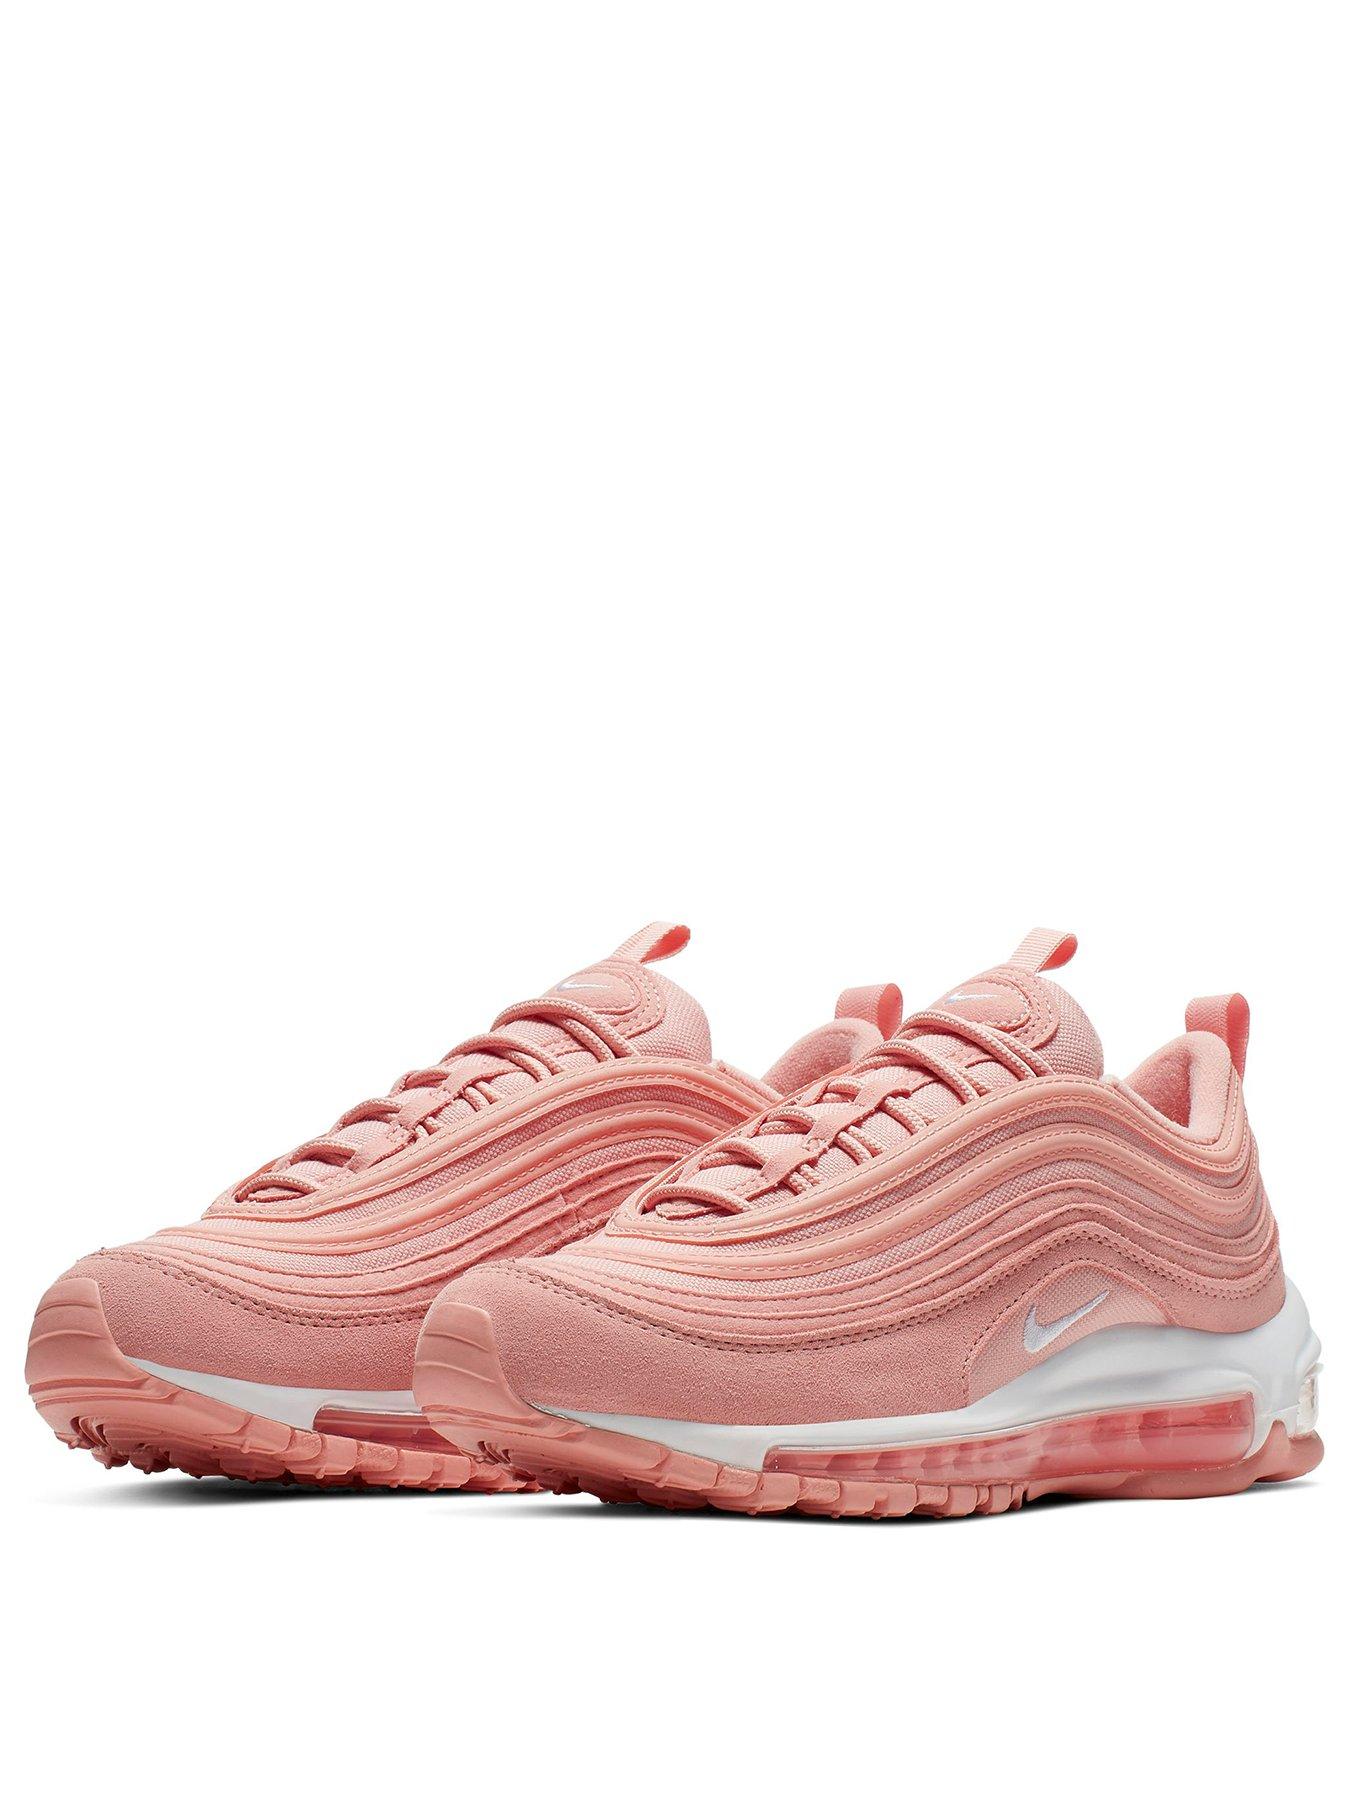 coral 97s